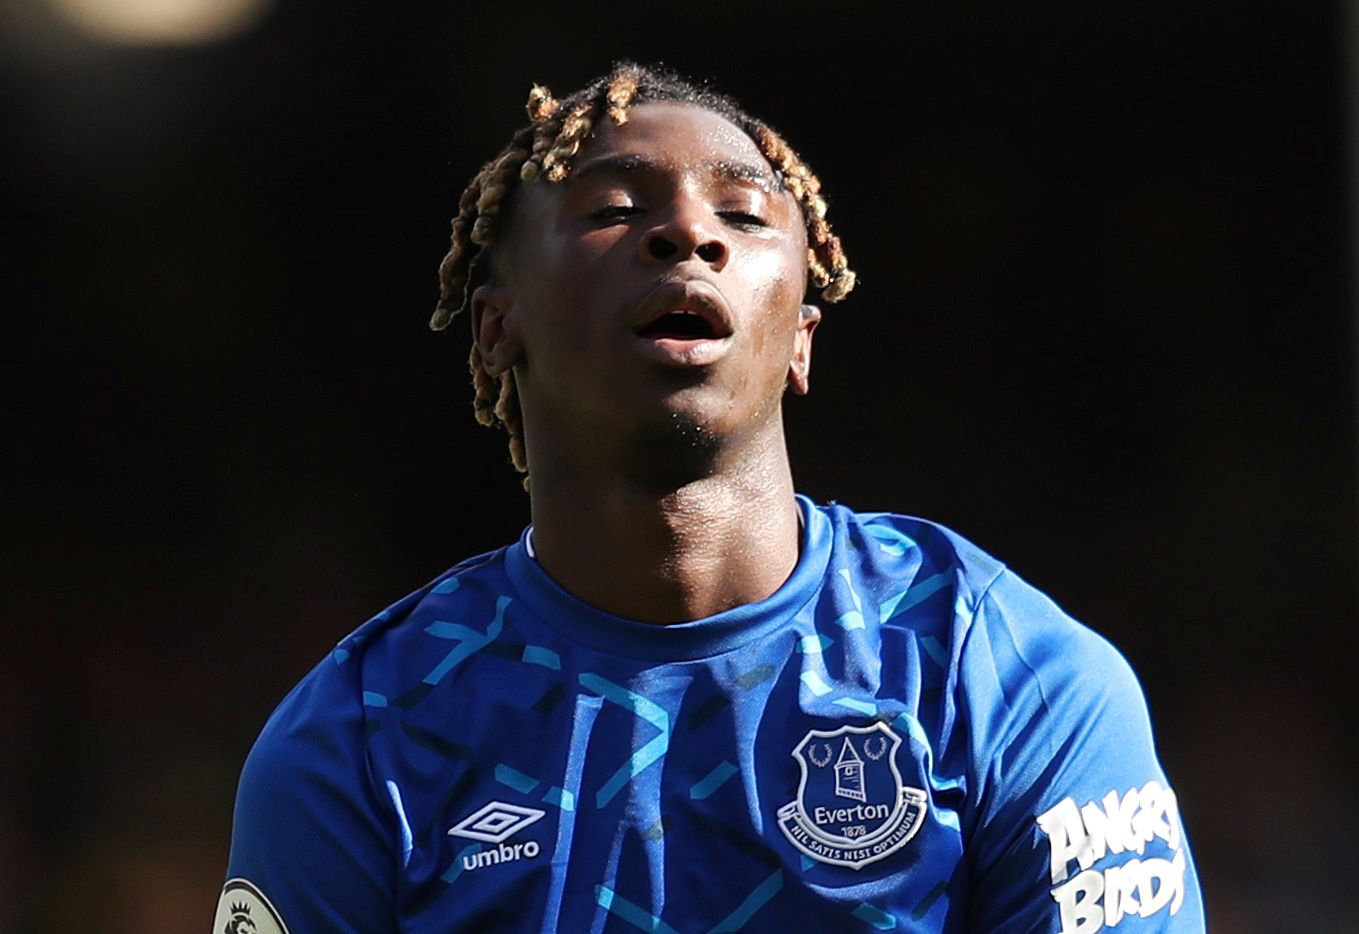 Soccer Football - Premier League - Everton v Watford - Goodison Park, Liverpool, Britain - August 17, 2019  Everton's Moise Kean reacts after a missed chance REUTERS/Jon Super  EDITORIAL USE ONLY. No use with unauthorized audio, video, data, fixture lists, club/league logos or 